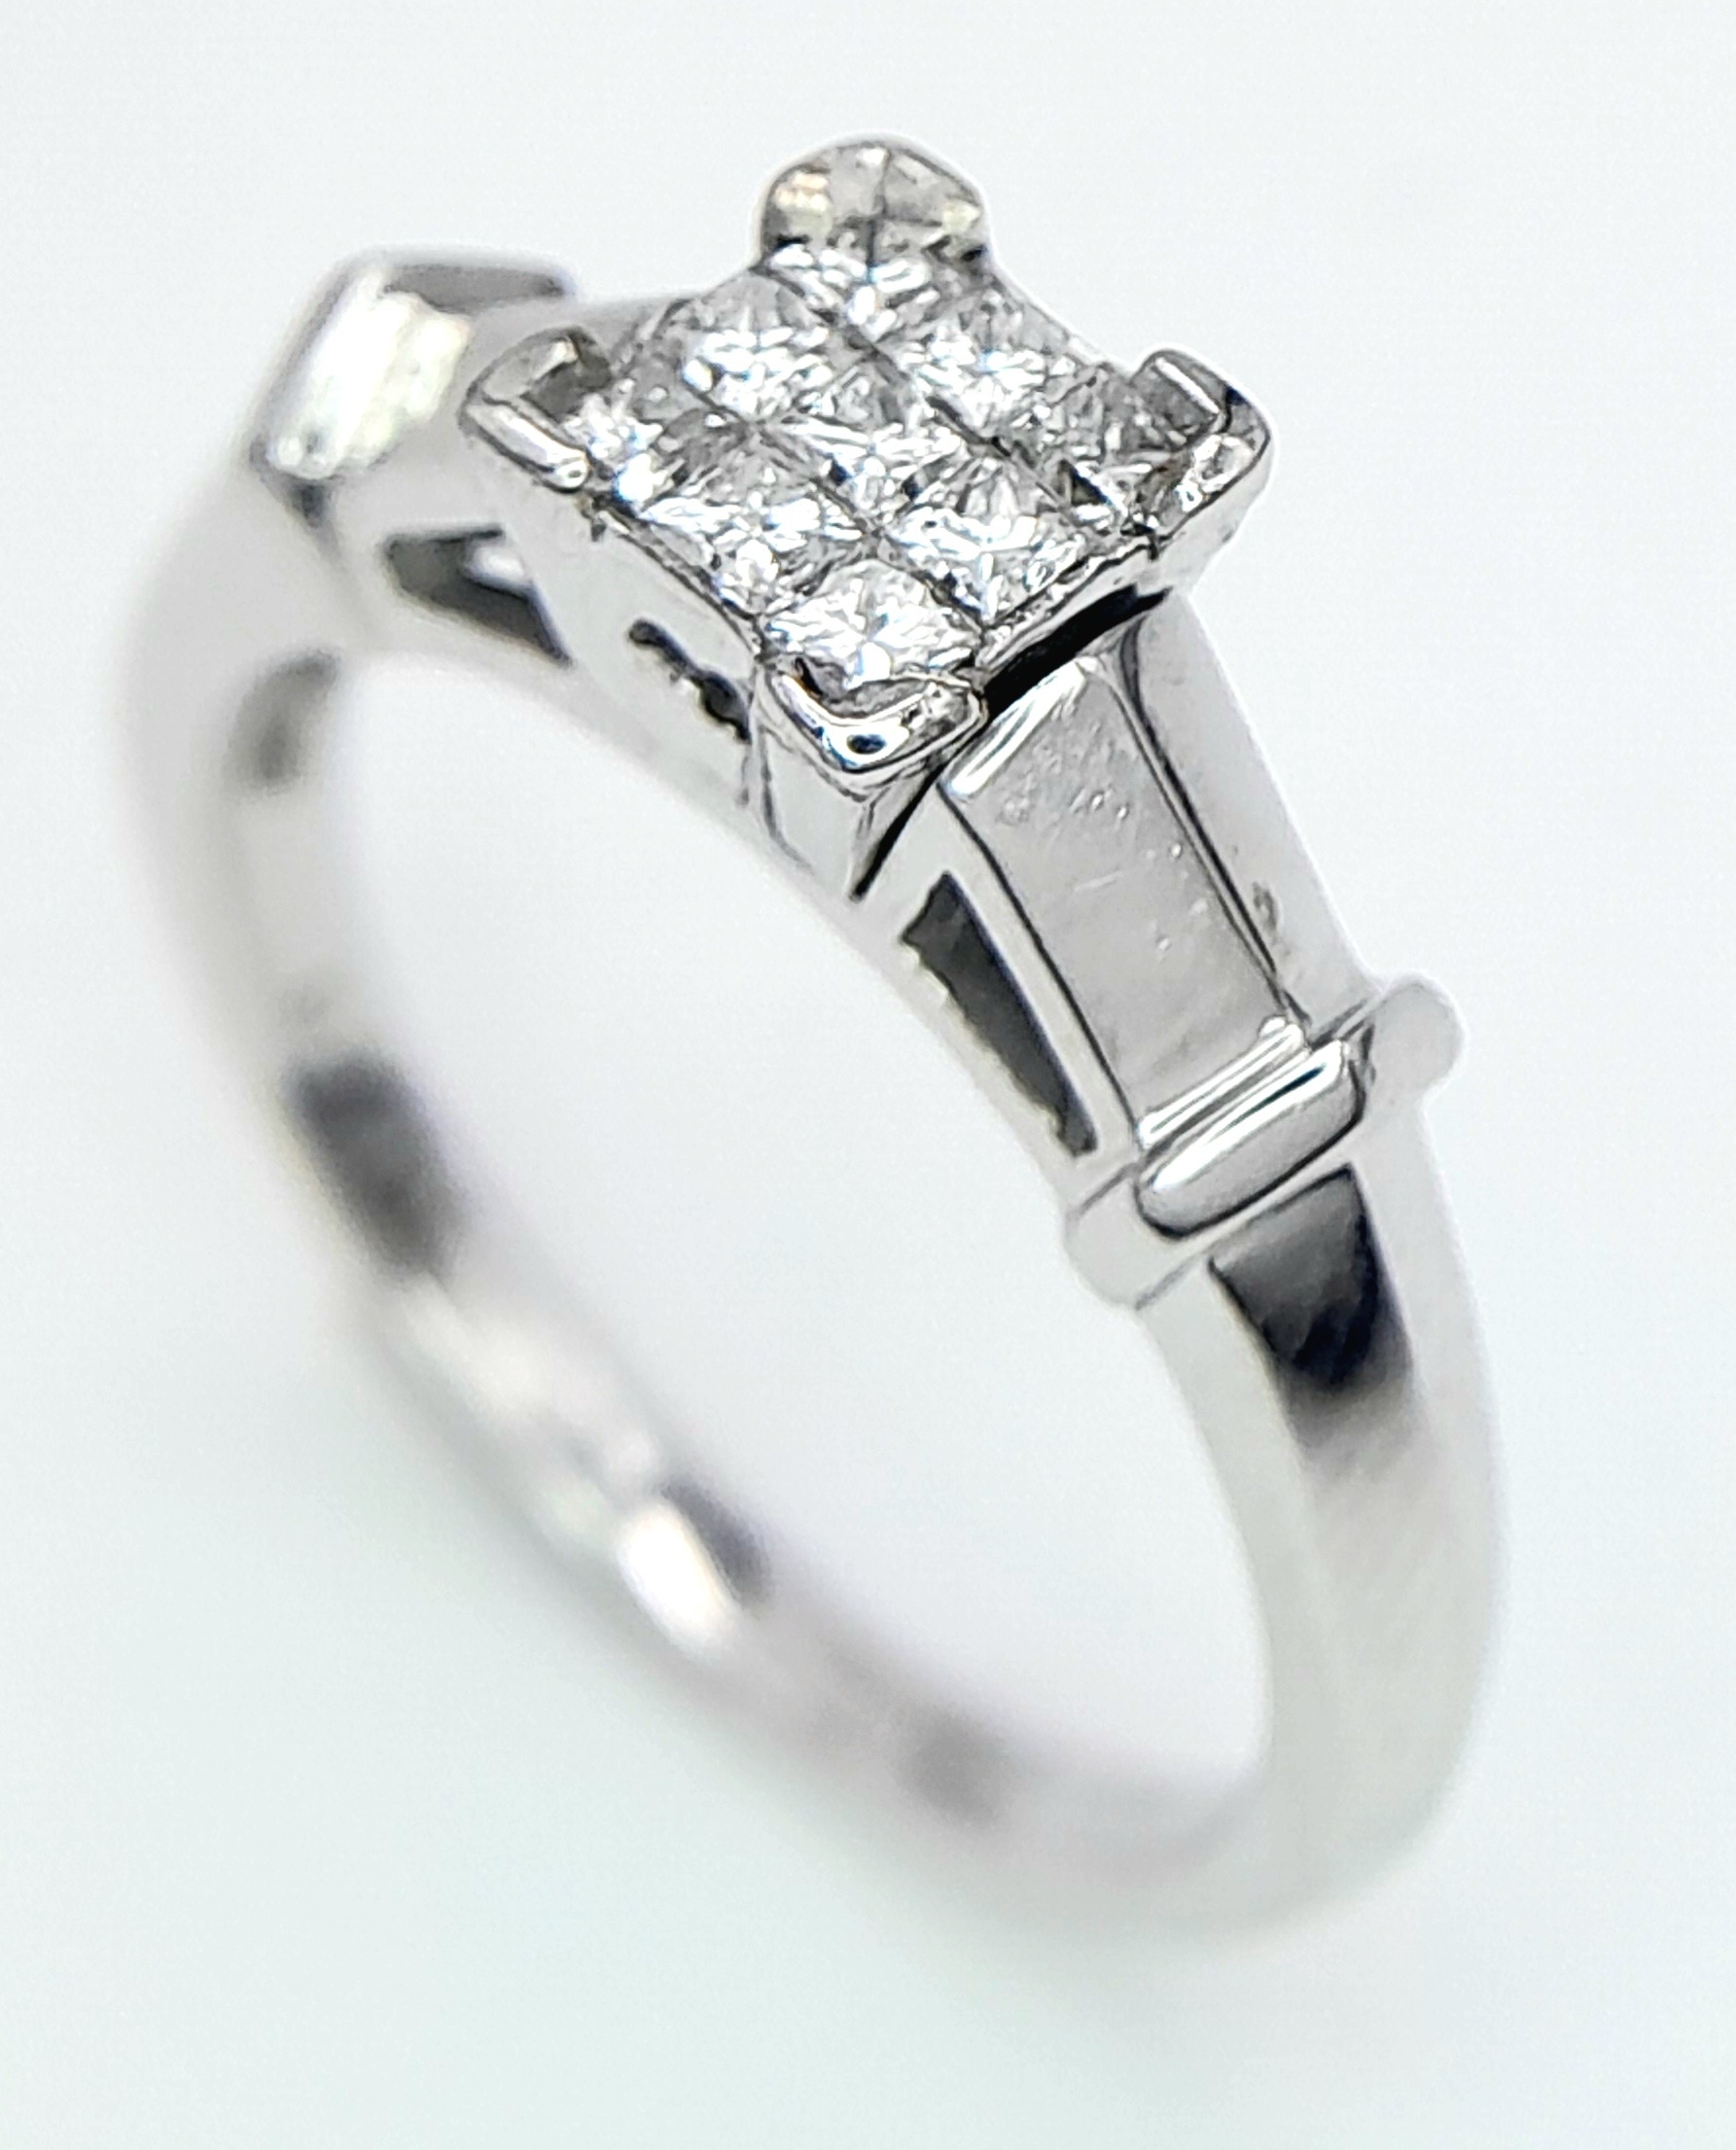 AN 18K WHITE GOLD DIAMOND RING. 0.25ctw, Size M, 5.1g total weight. Ref: SC 8067 - Image 3 of 6